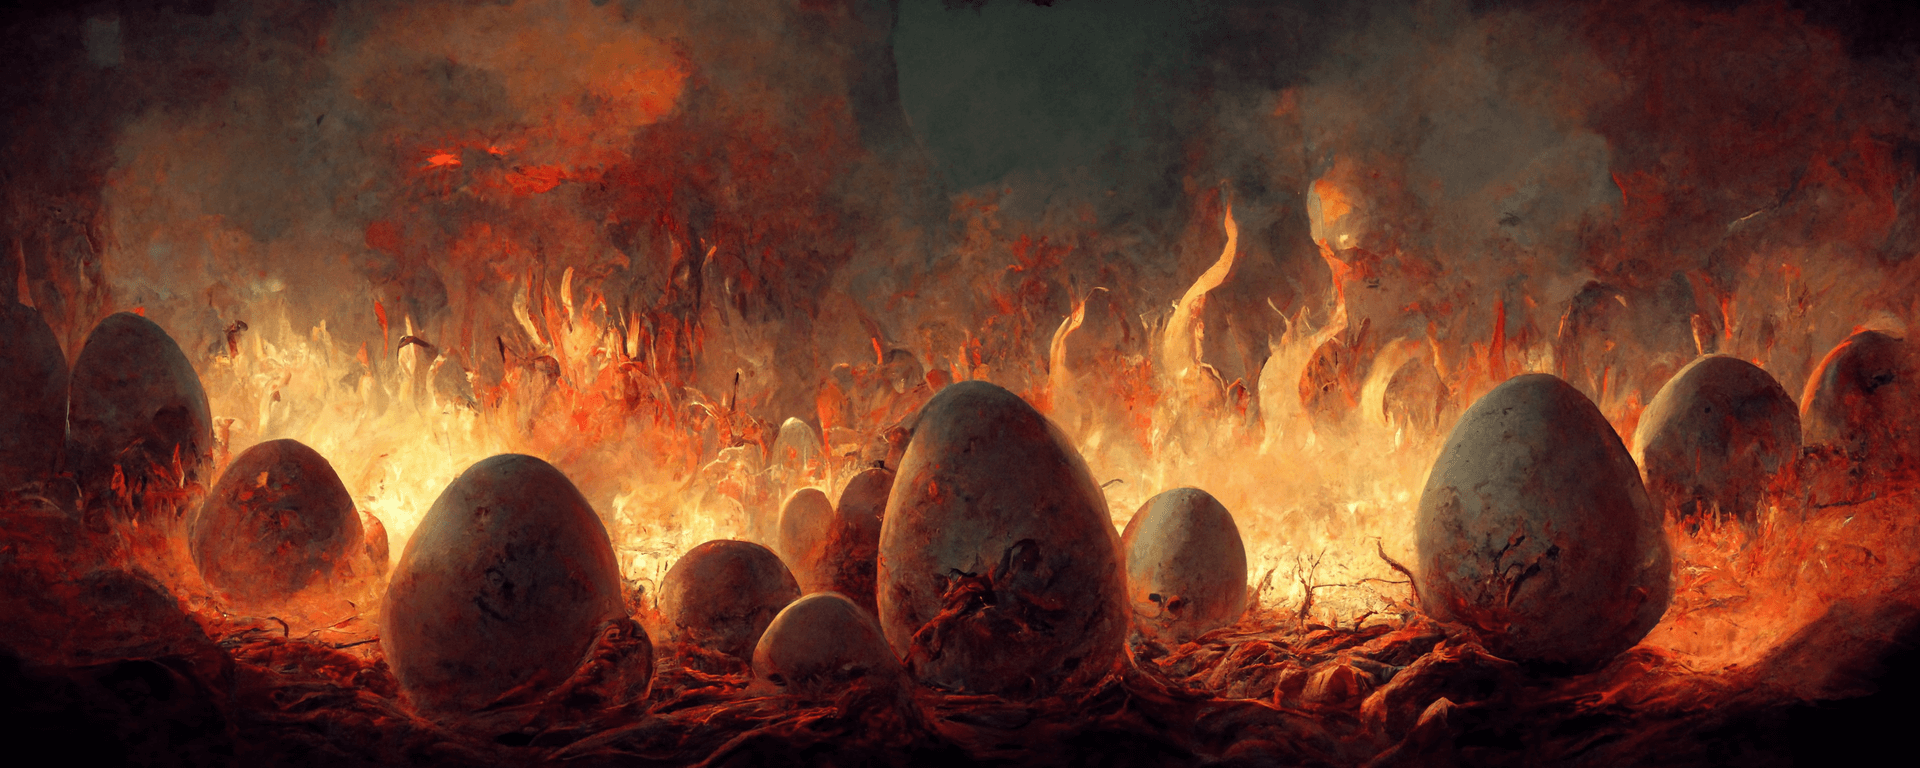 Eggs burning in hell